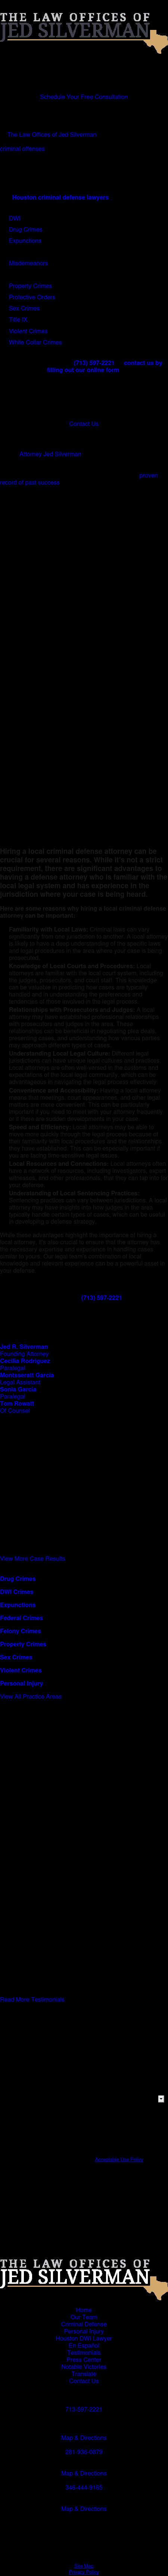 Law Offices of Jed Silverman - Richmond TX Lawyers